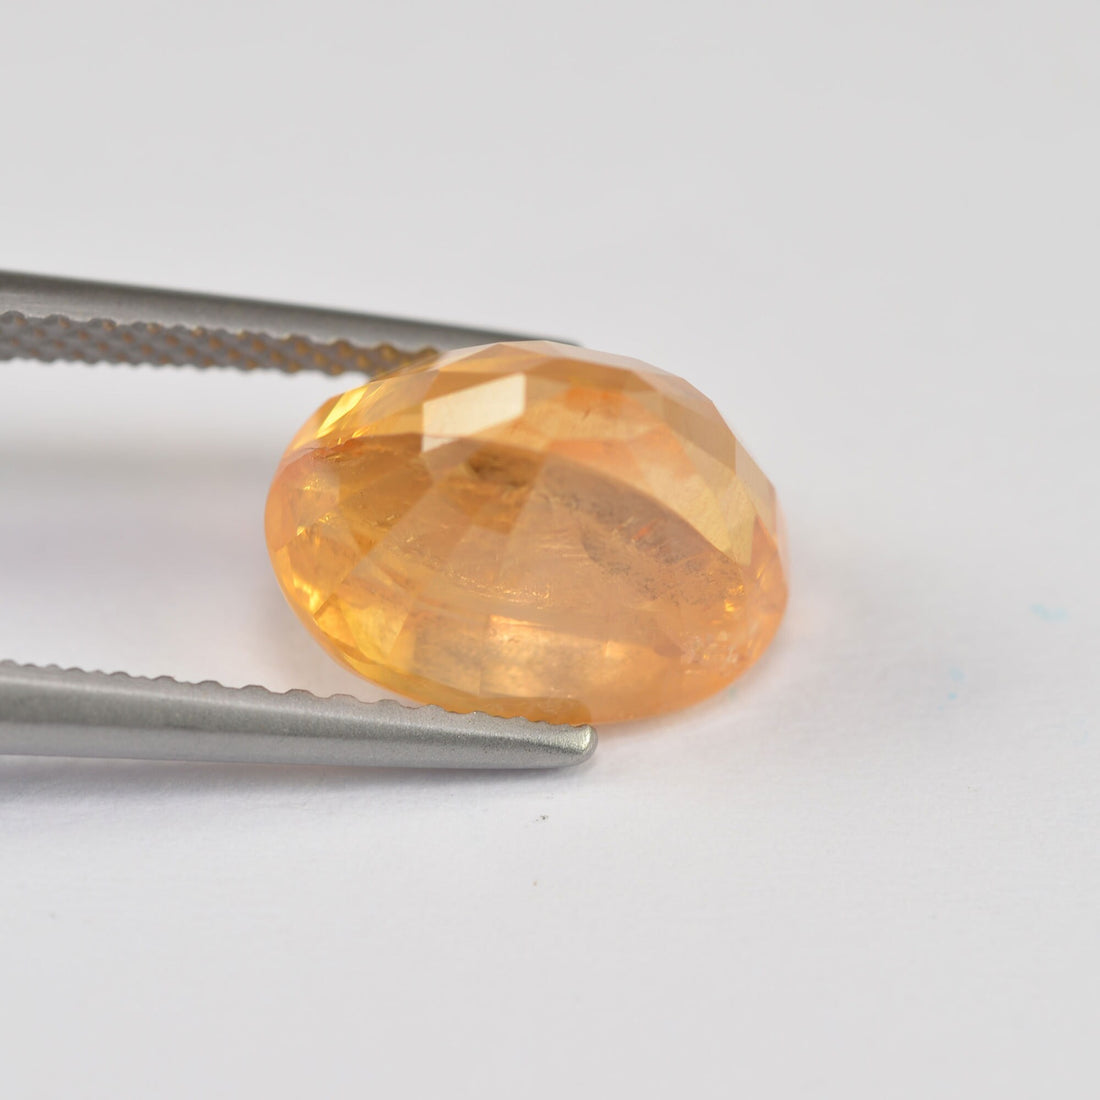 4.94 cts Natural Yellow Sapphire Loose Gemstone Oval Cut